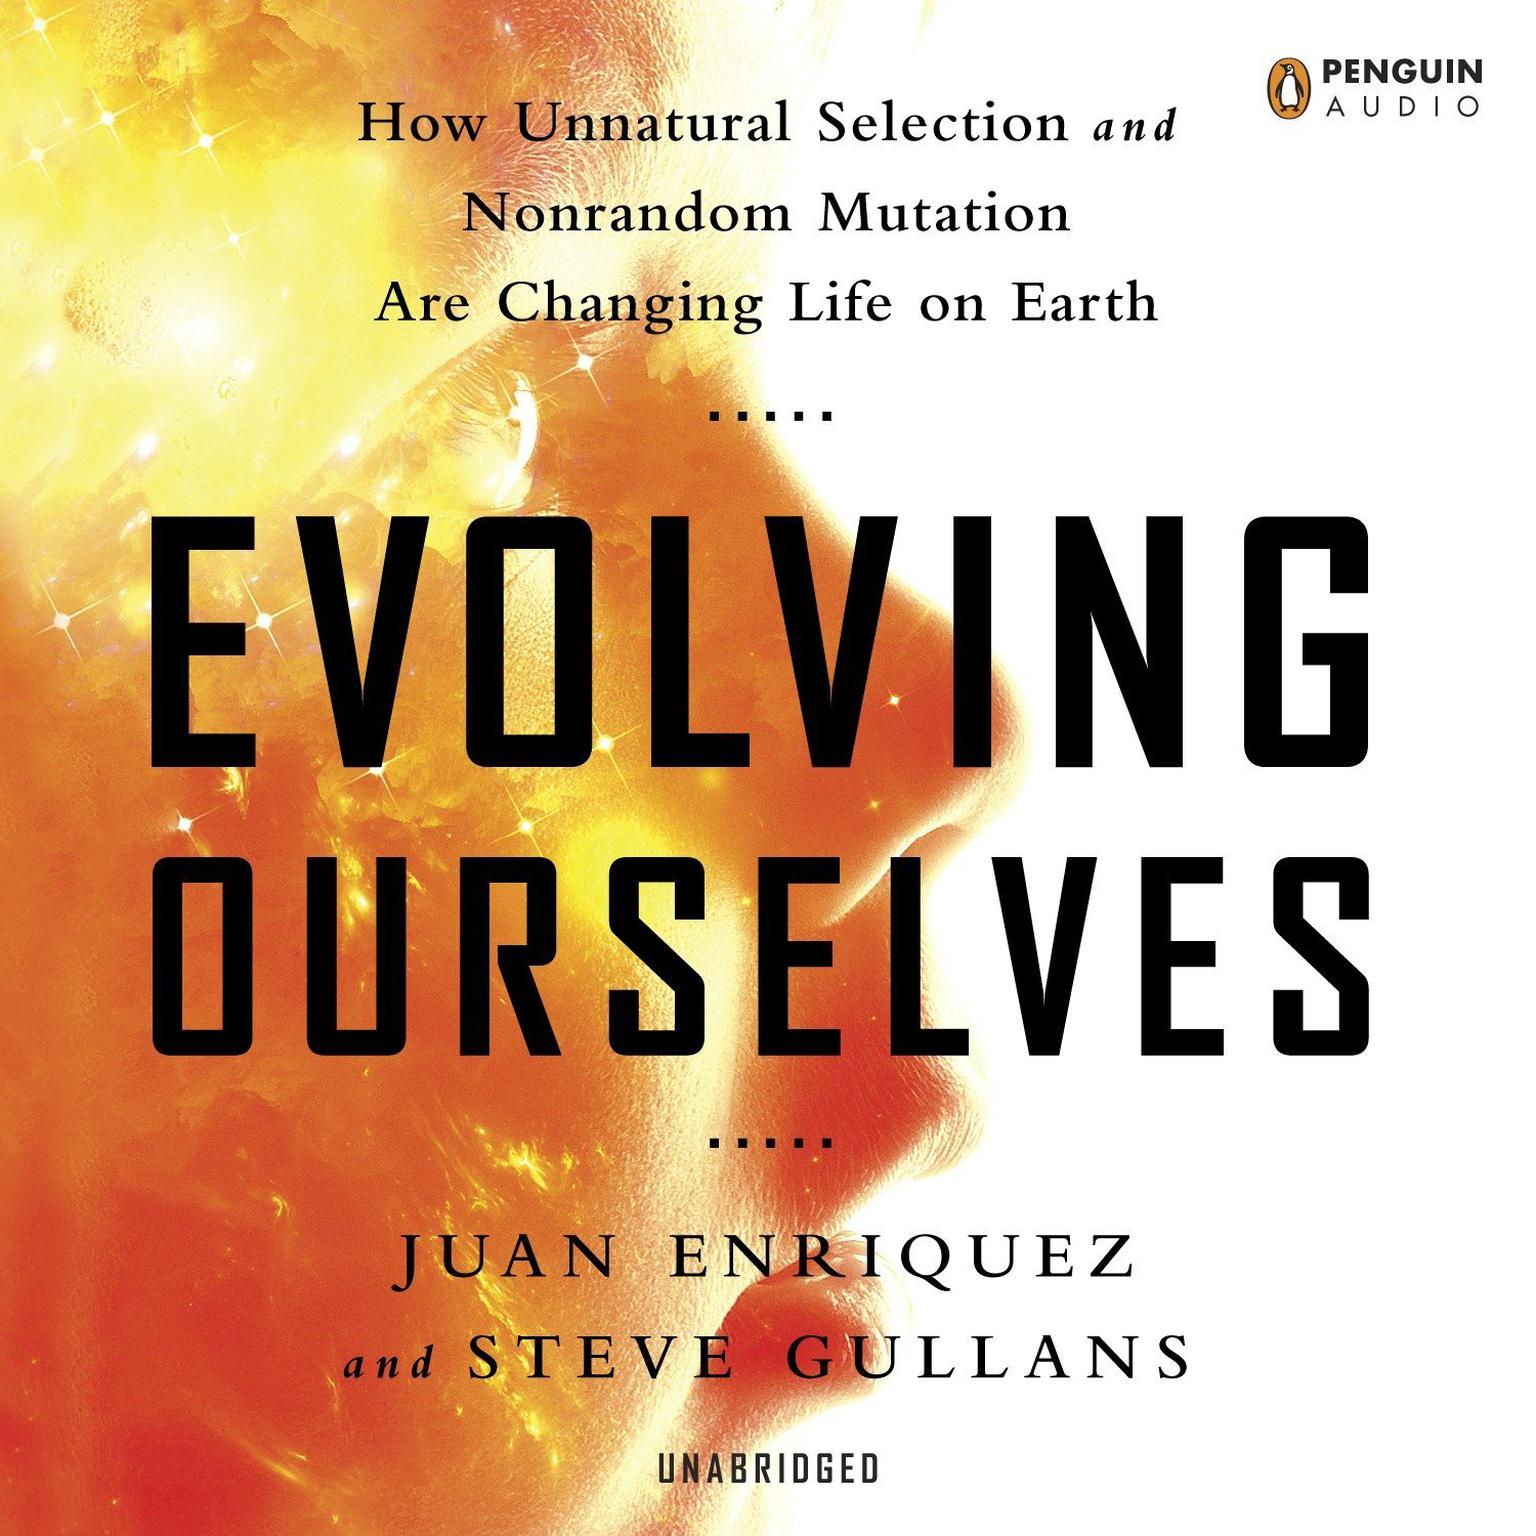 Evolving Ourselves: How Unnatural Selection and Nonrandom Mutation are Changing Life on Earth Audiobook, by Juan Enriquez